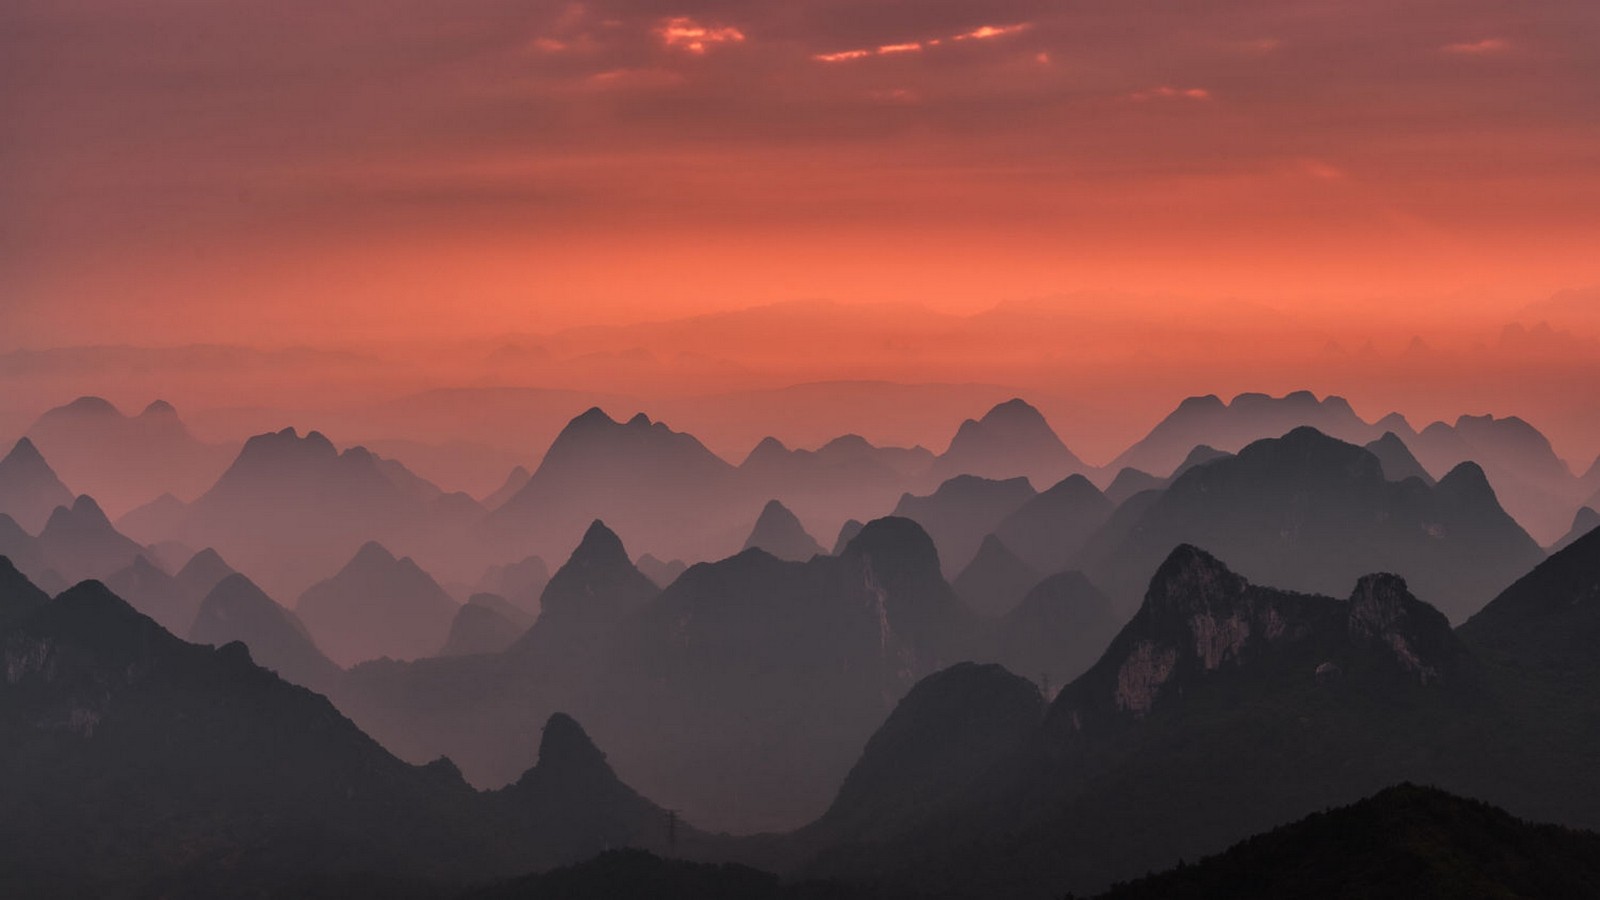 General 1600x900 nature landscape mountains mist pink sky Guilin national park China Asia orange sky low light cropped